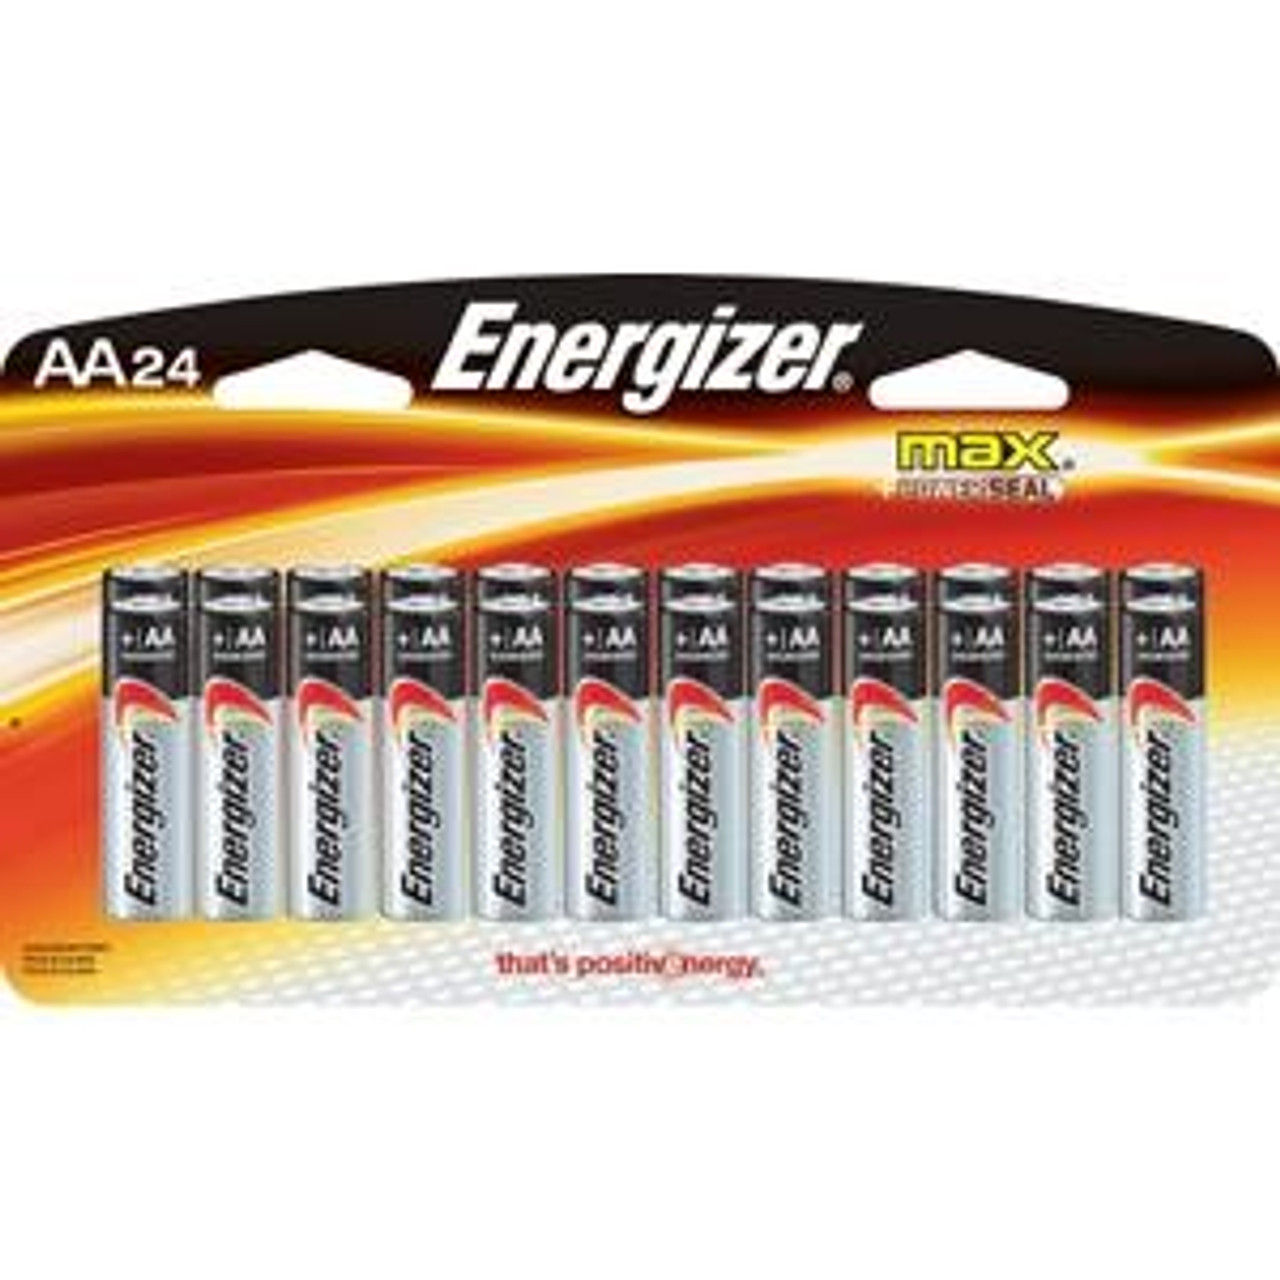 Energizer Max AA Battery - 24 Family Pack